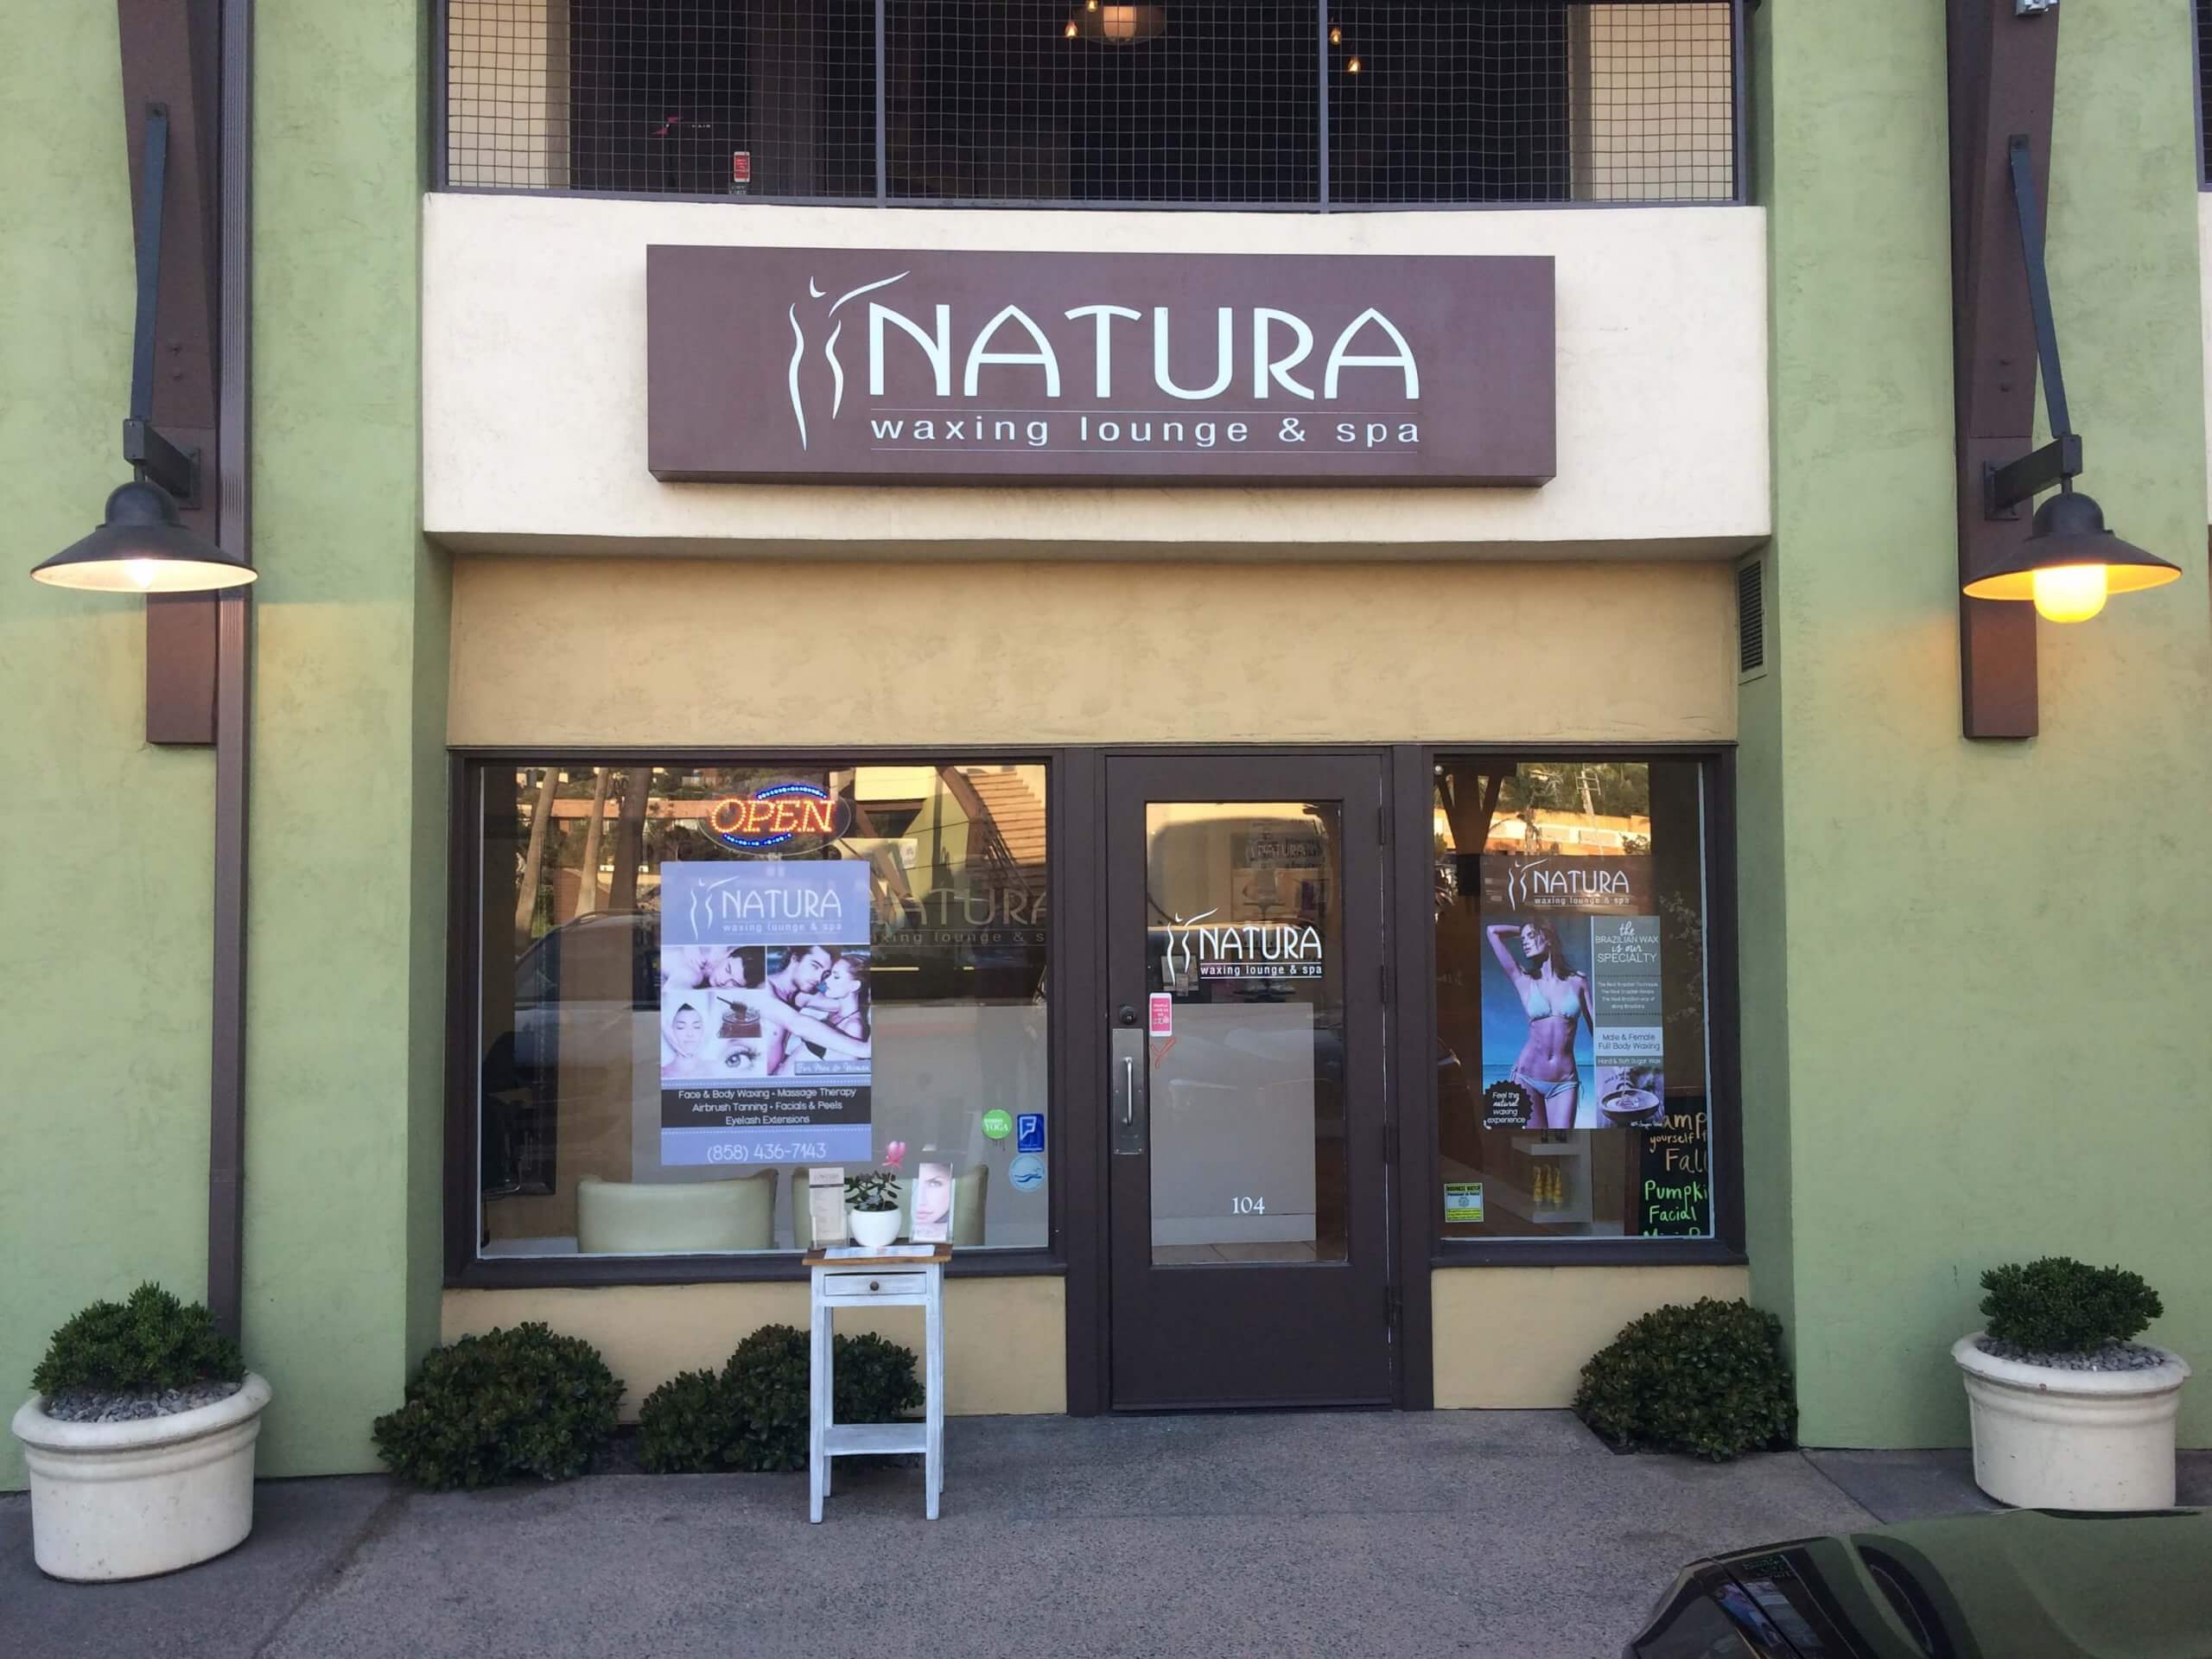 Best Sugaring Melt and Waxing lounge - Natura Spa Locations